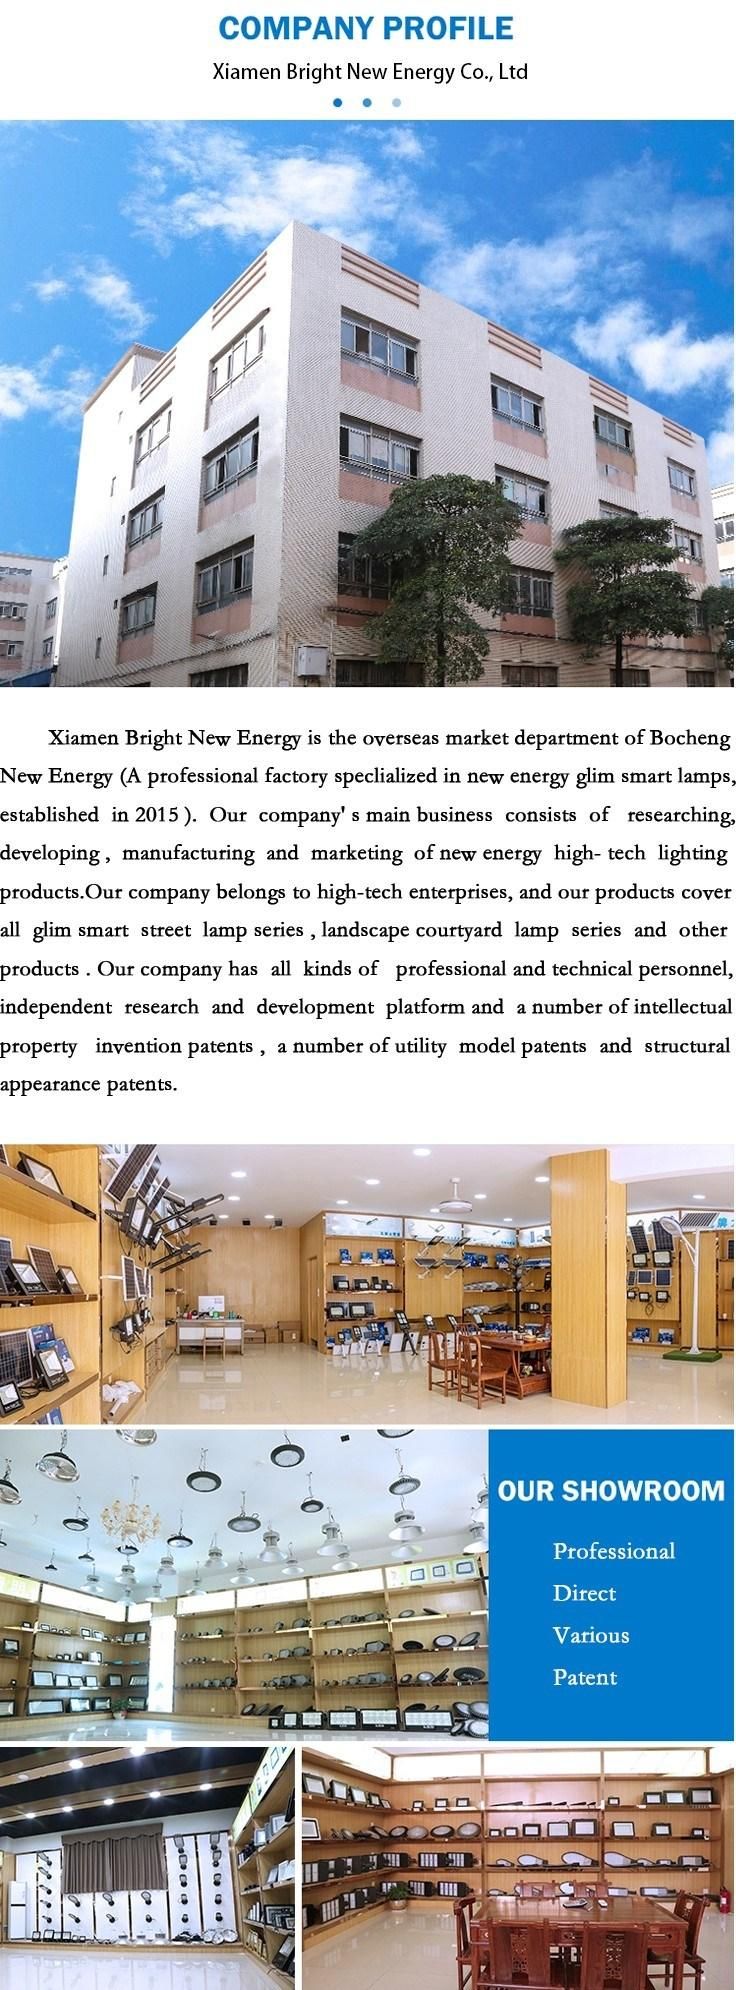 Residential Ceiling LED Light Solar Energy Power Lamp Lights Decoration Lighting Street Energy Saving System Home Lamps Bulbs Products Portable Light